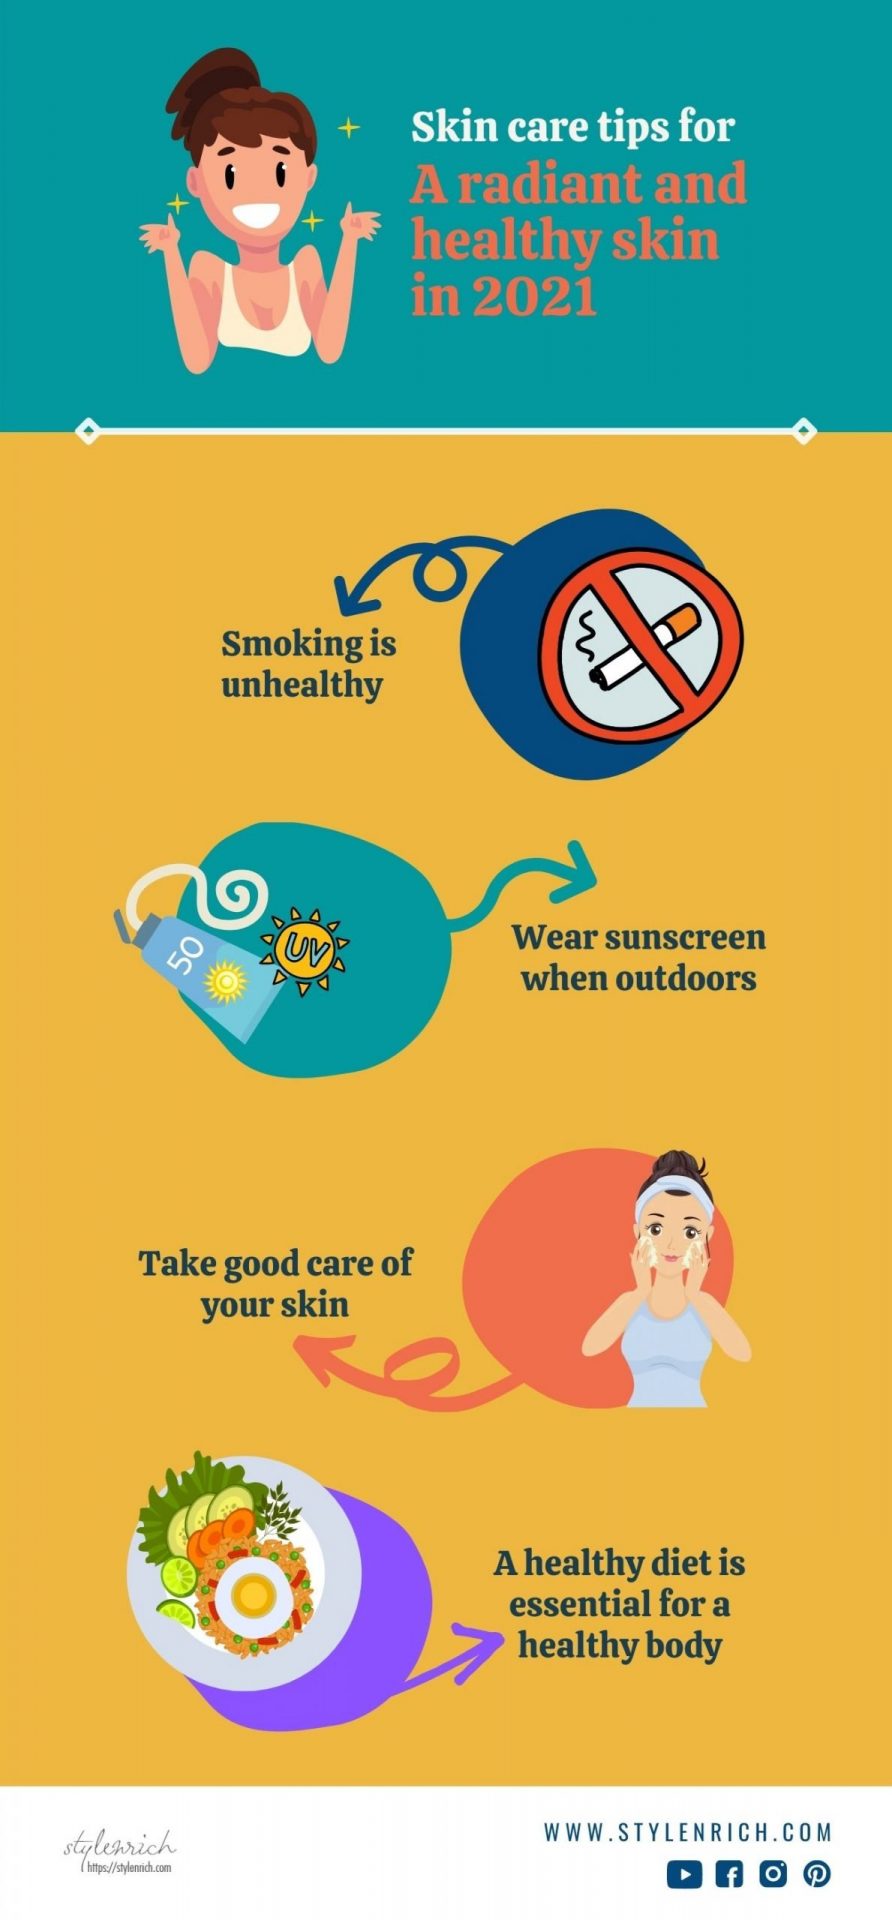 Skin care tips for a radiant and healthy skin in 2021